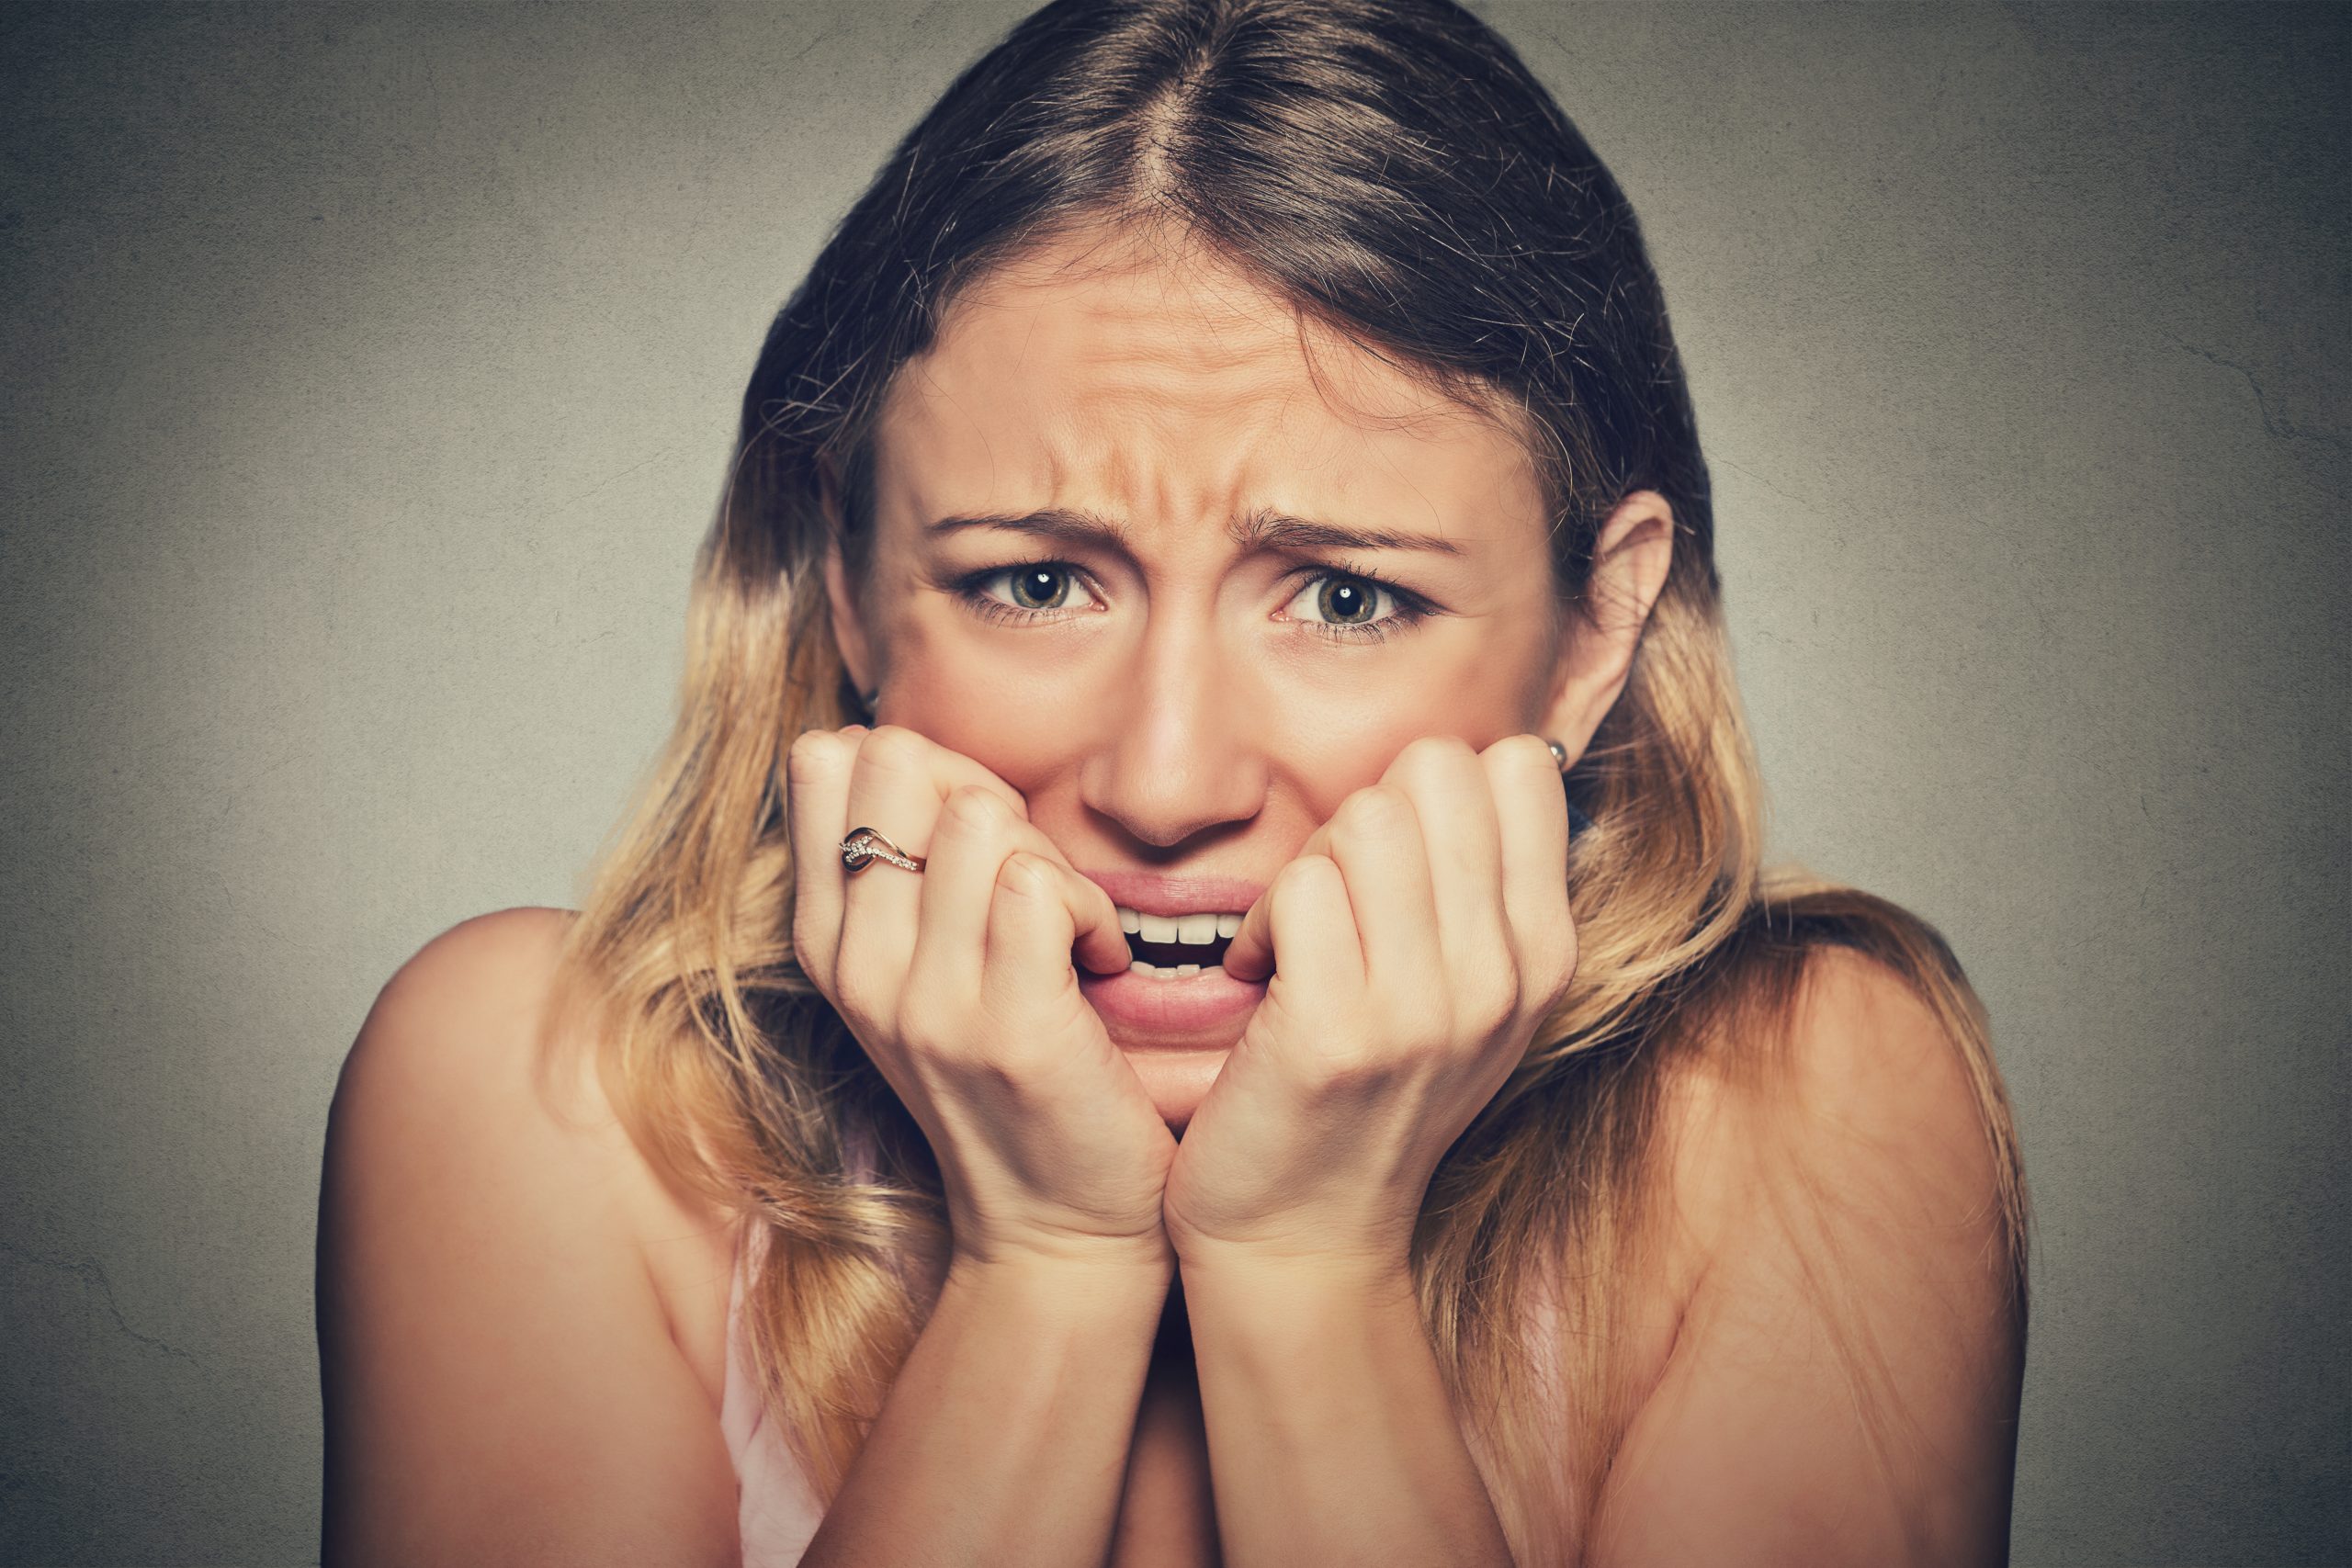 Closeup portrait headshot nervous stressed young woman girl student biting fingernails looking anxiously craving something isolated grey wall background. Human emotion face expression feeling